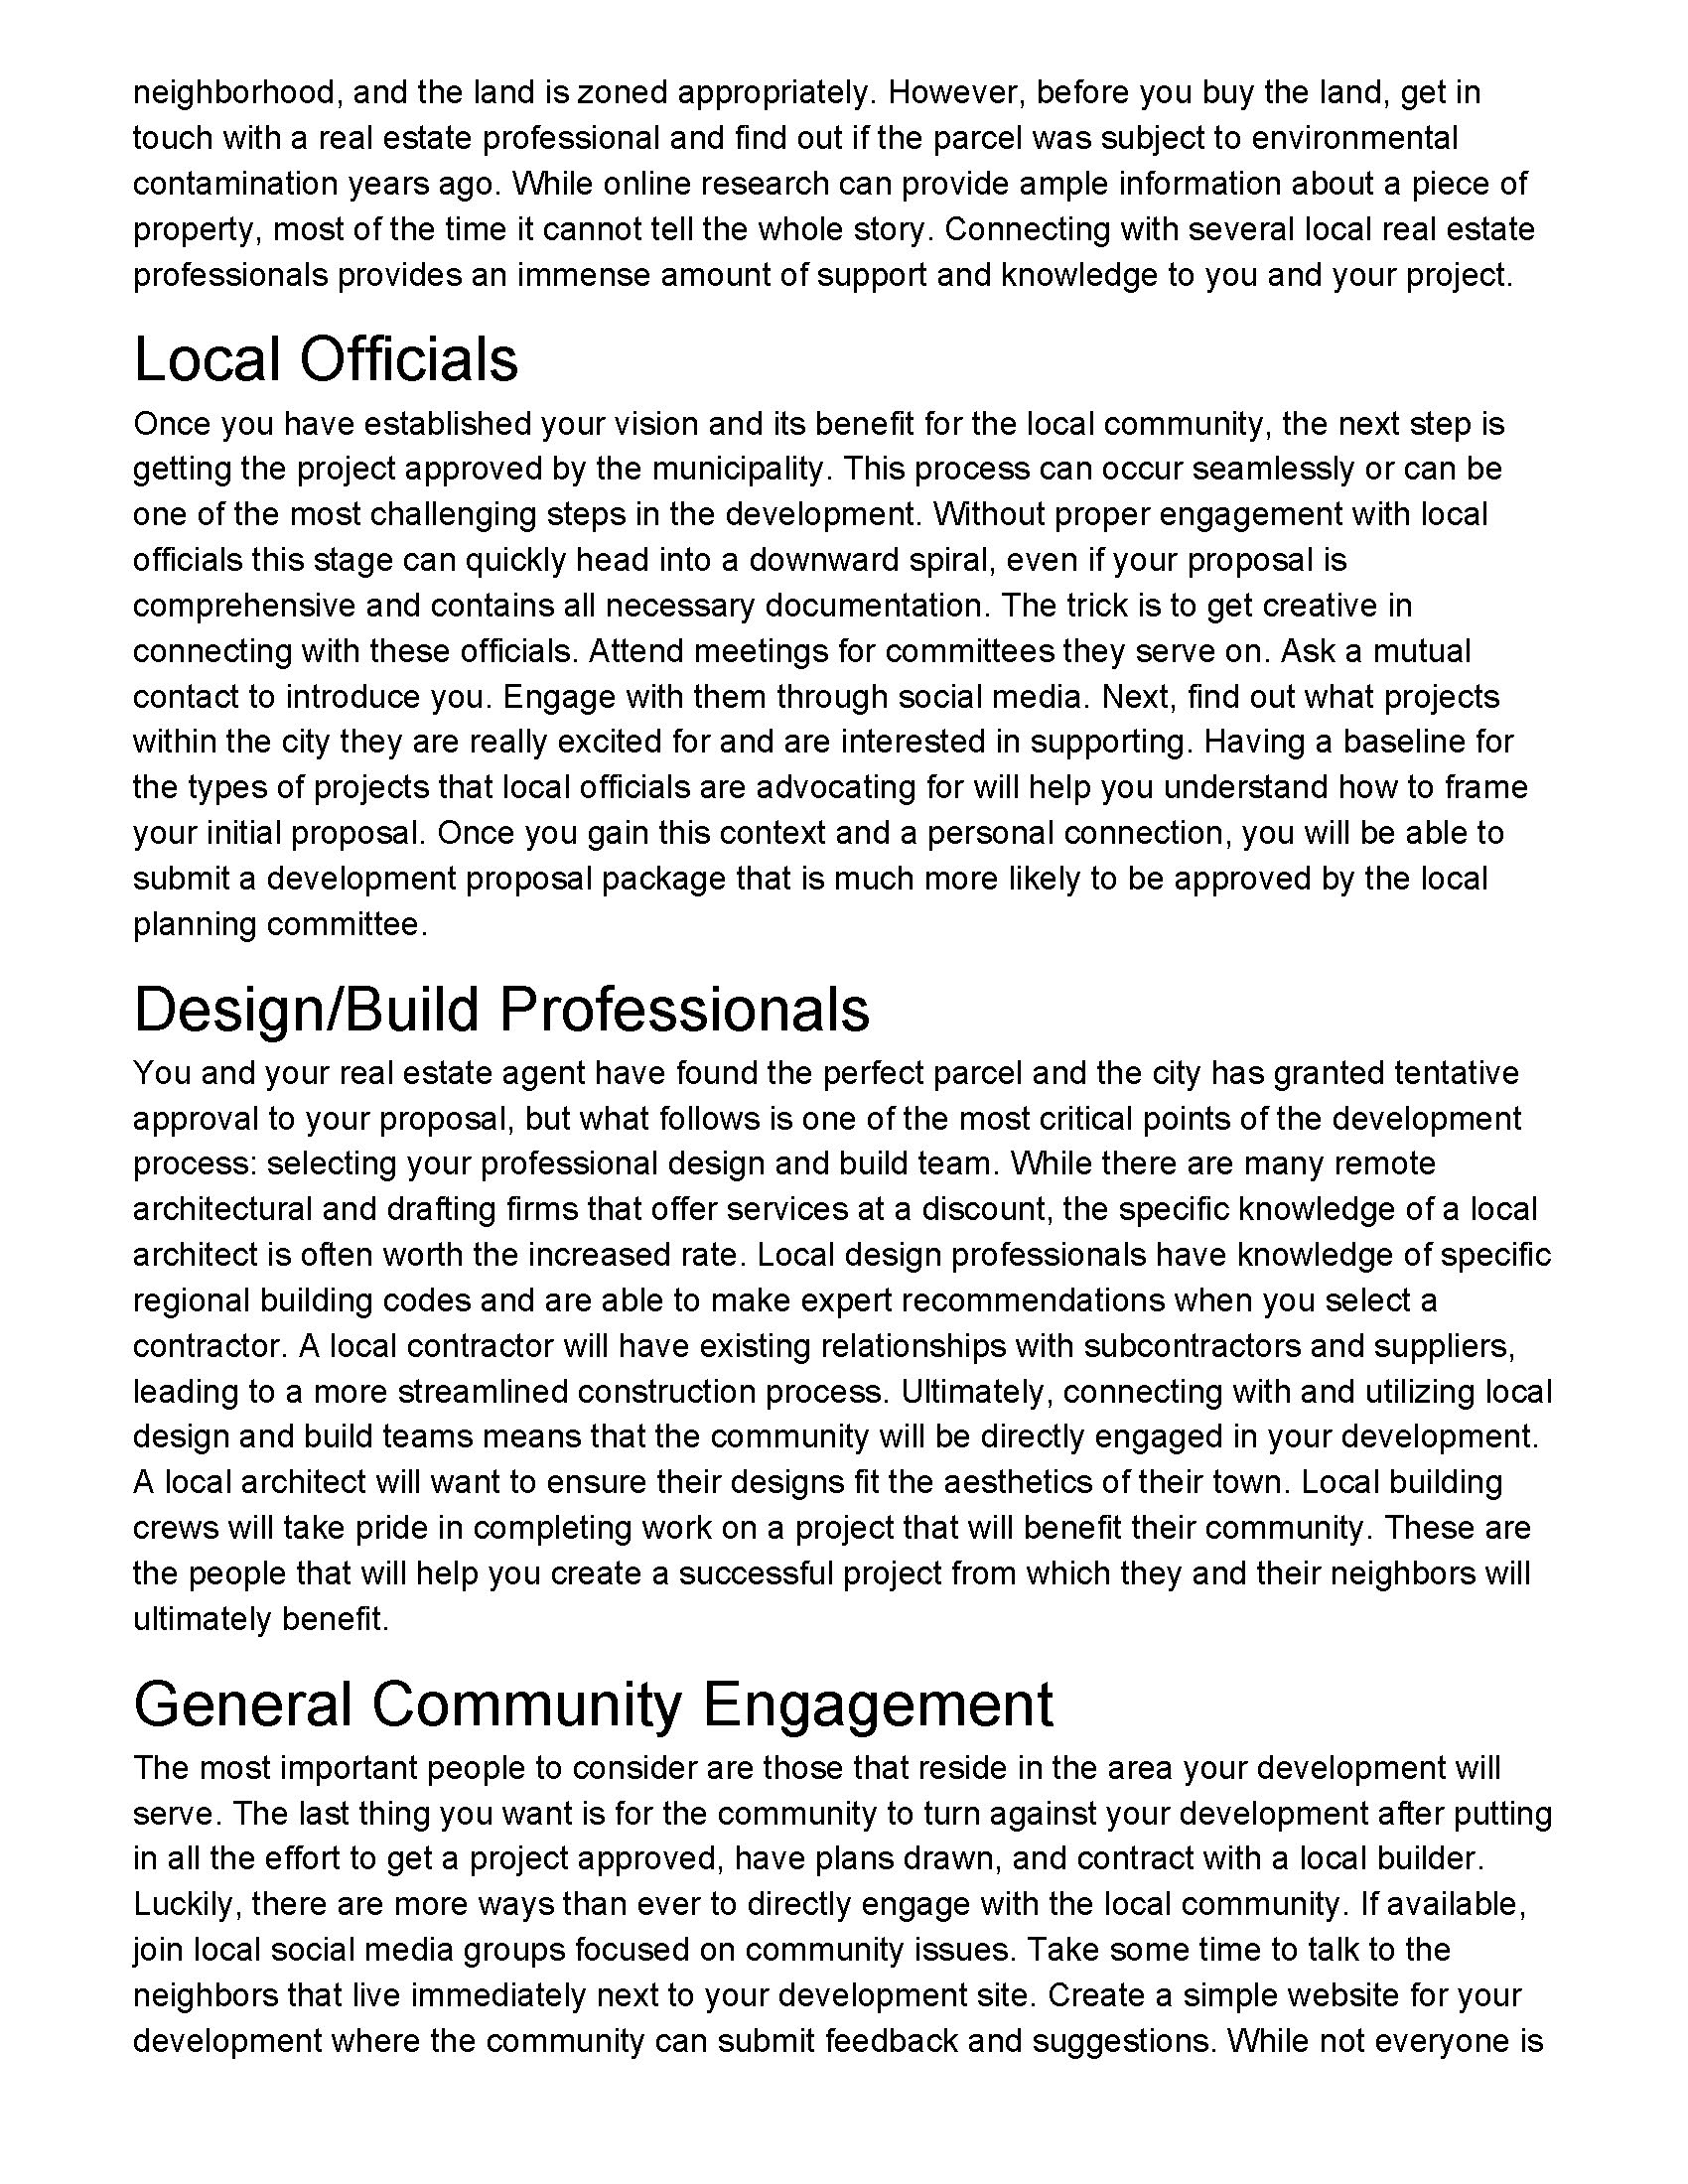 Image of article - Property Development is About People Page 2